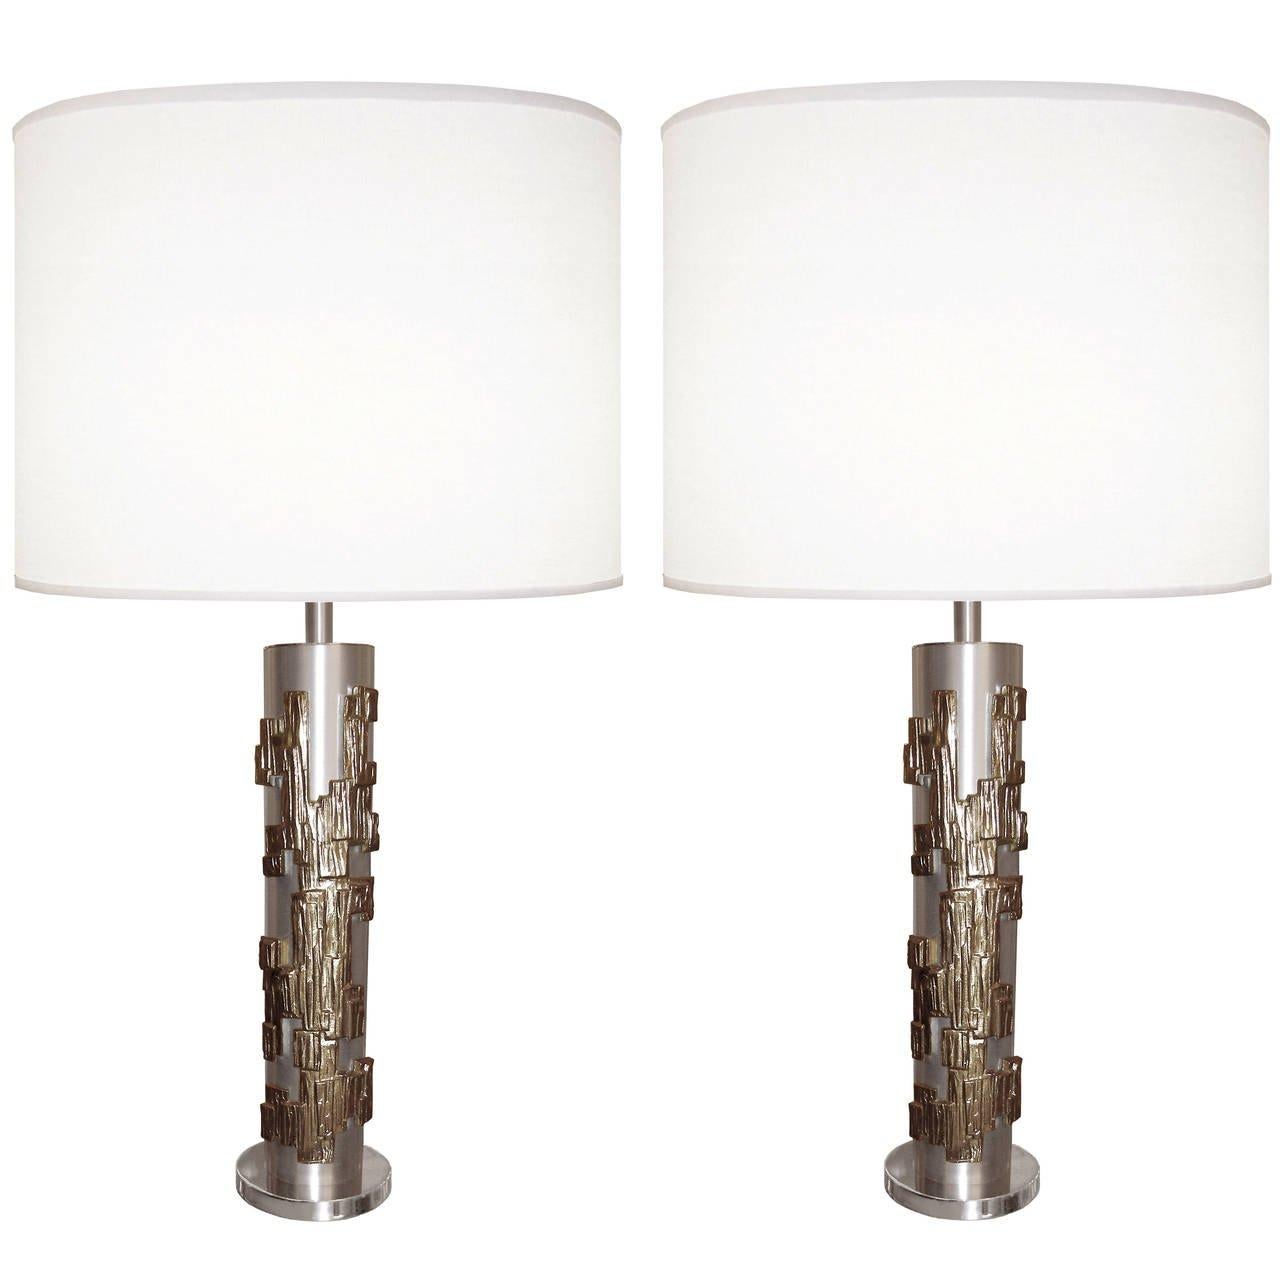 Pair of Modernist Bronze and Brushed Nickel Lamps In Excellent Condition For Sale In New York, NY